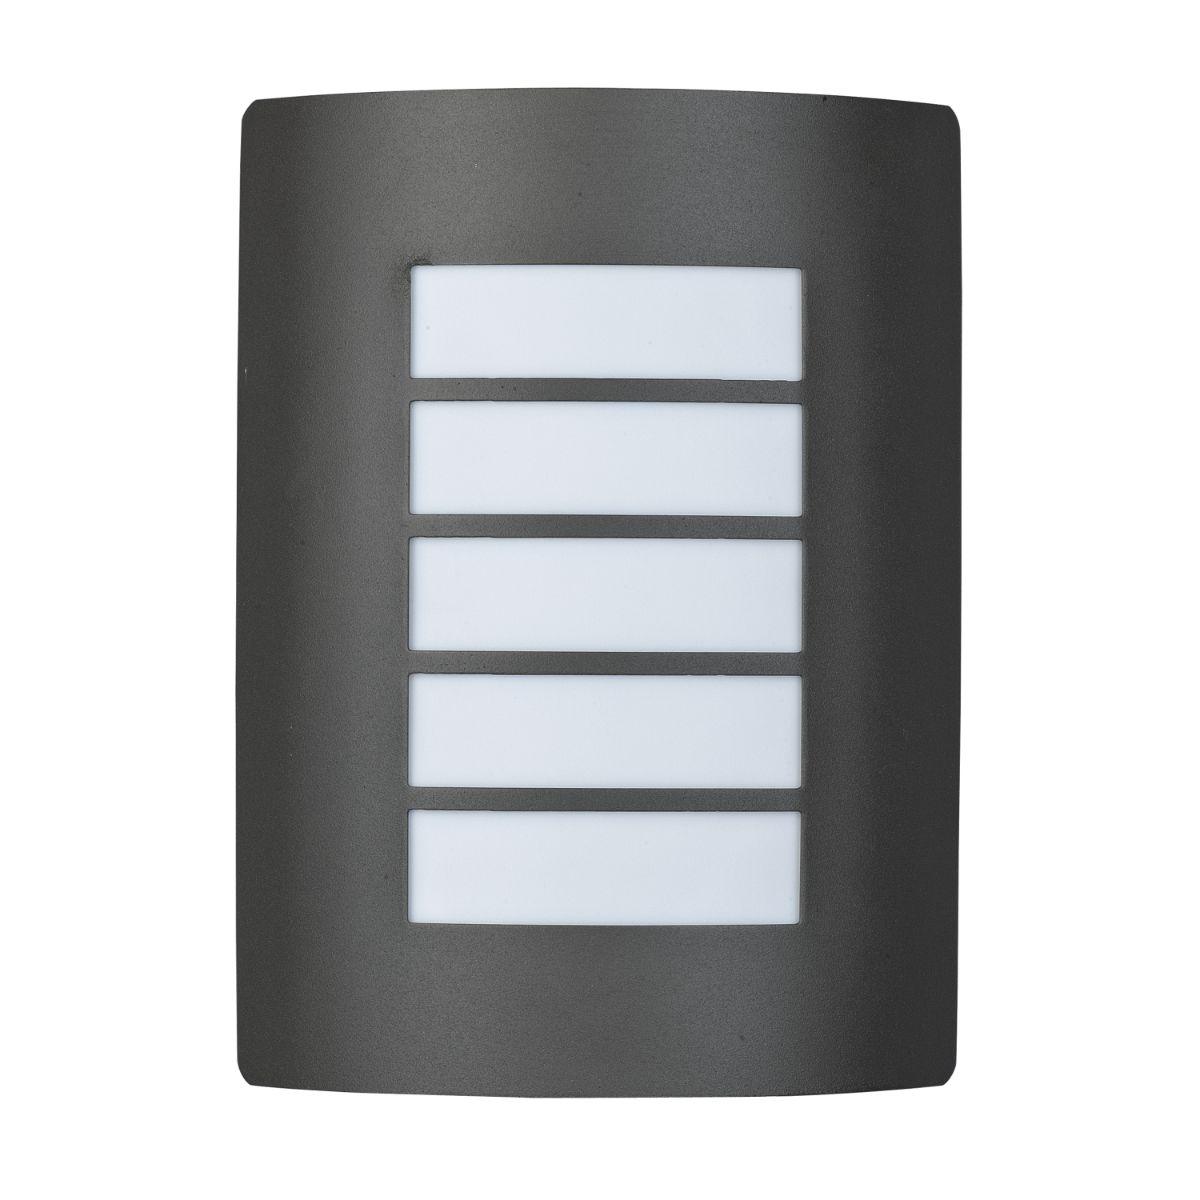 View LED 9 in. LED Outdoor Wall Light